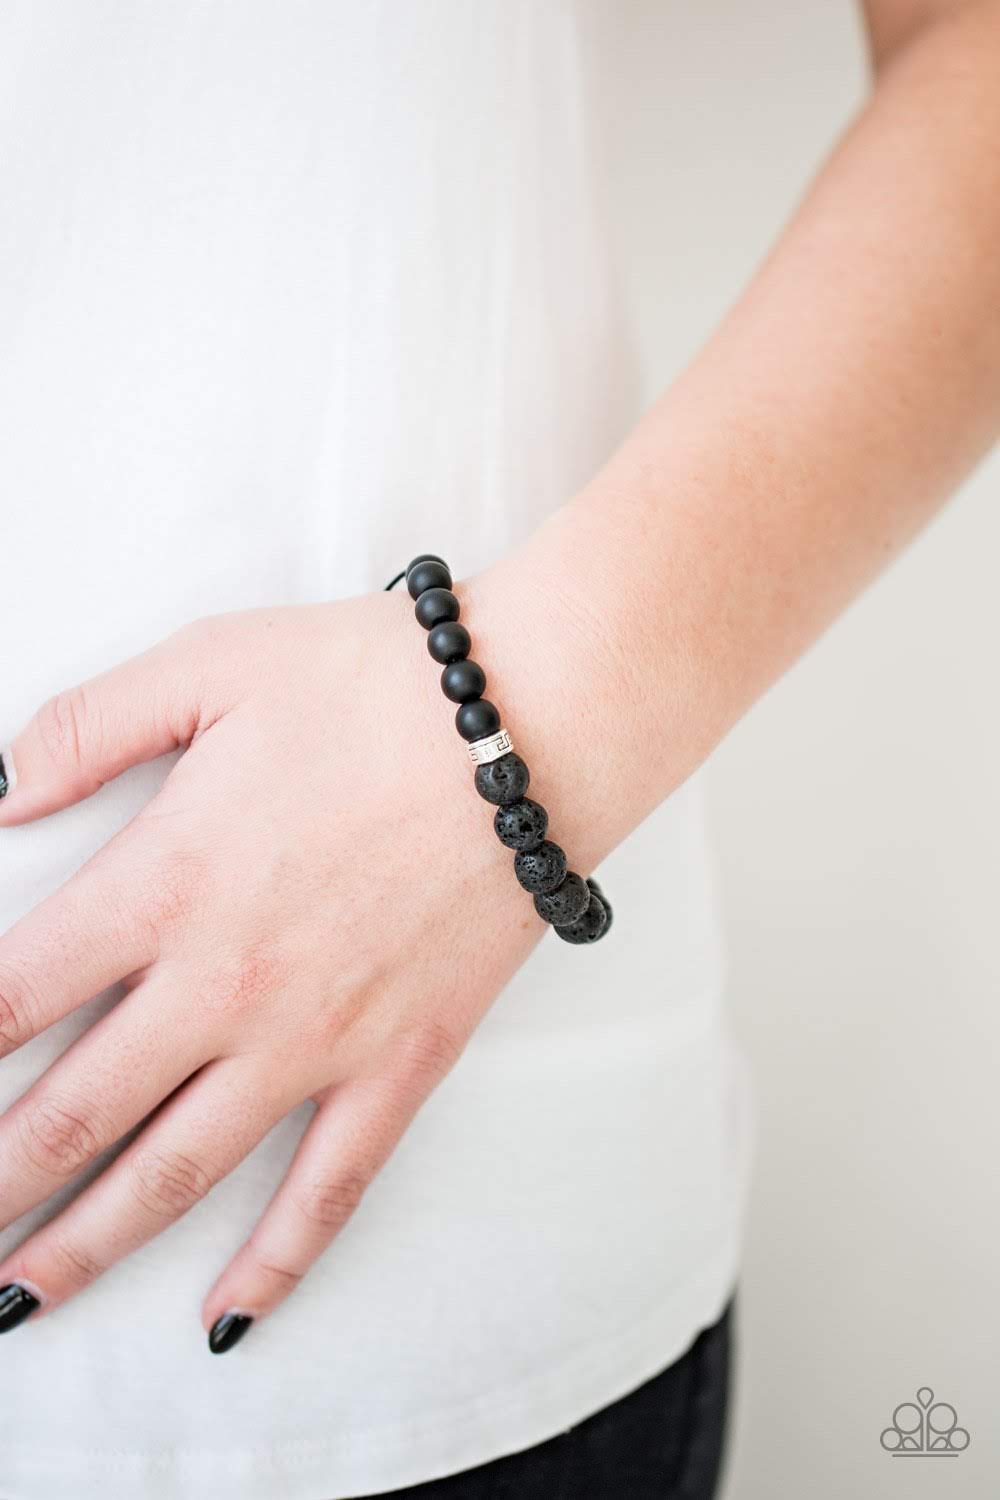 23 Really Cool Bracelets And Bangles That Are Elegant, Chic, And Stunning